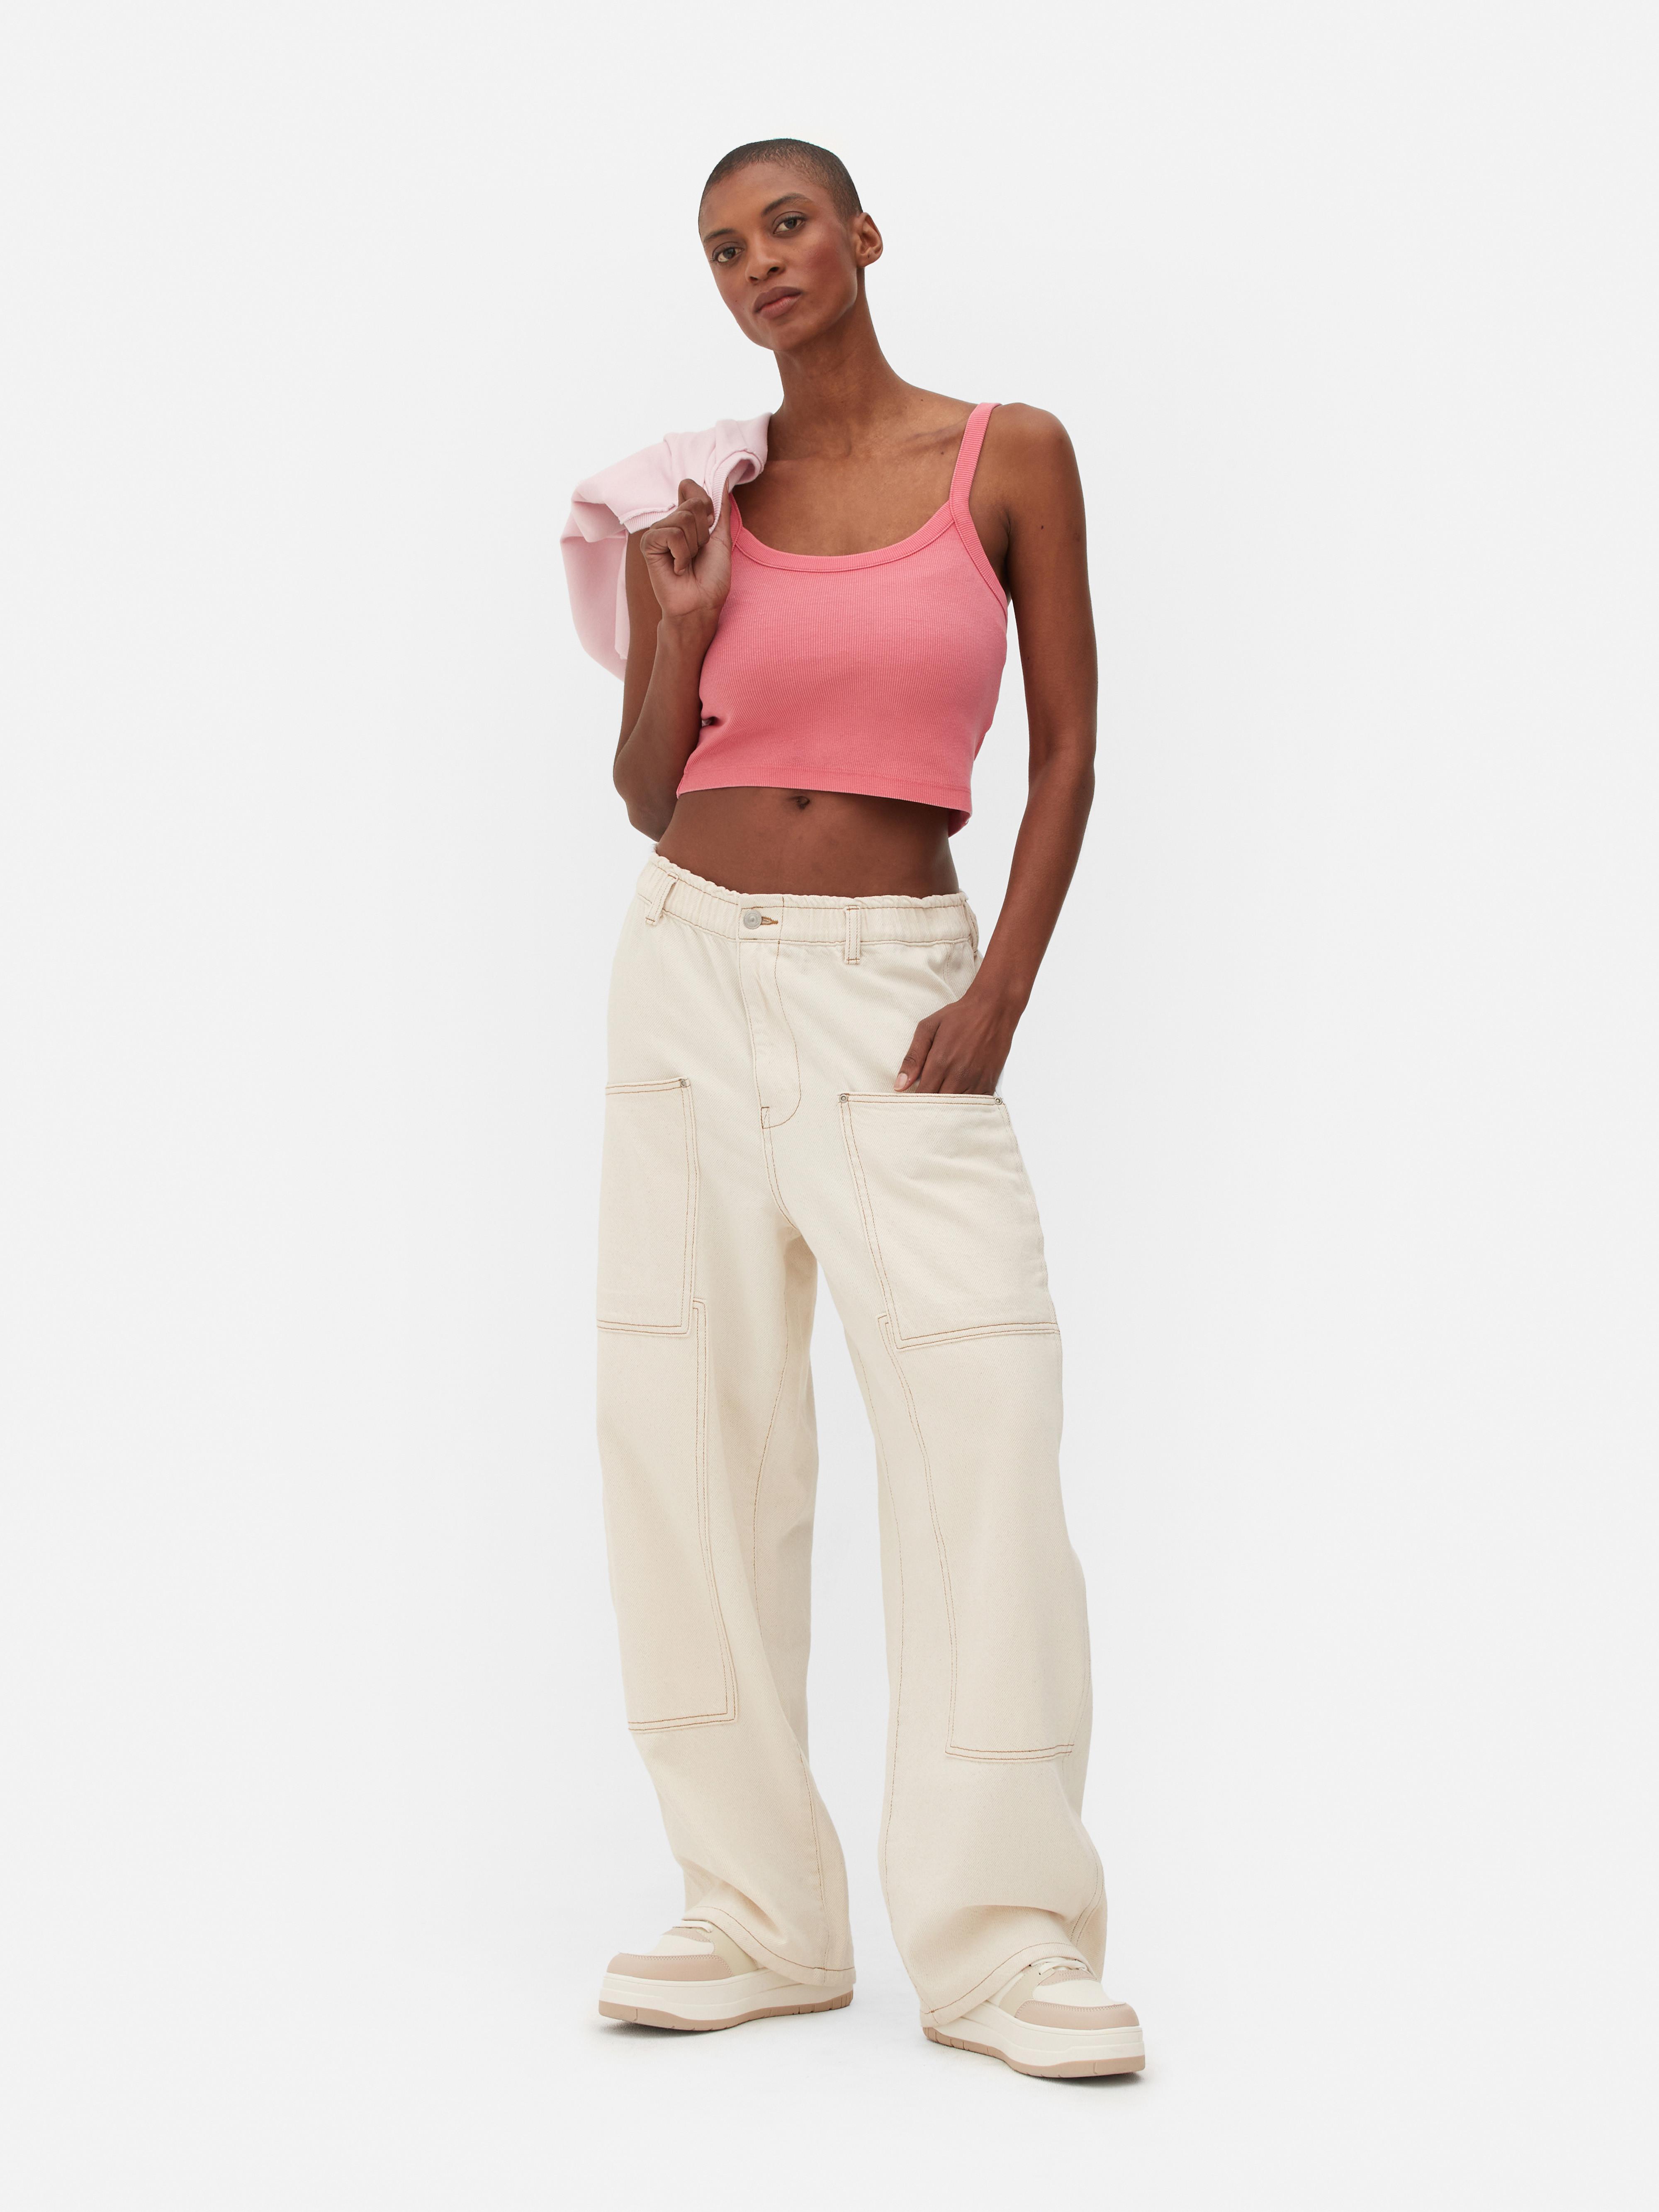 Women's Pink Cropped Cami Top | Primark